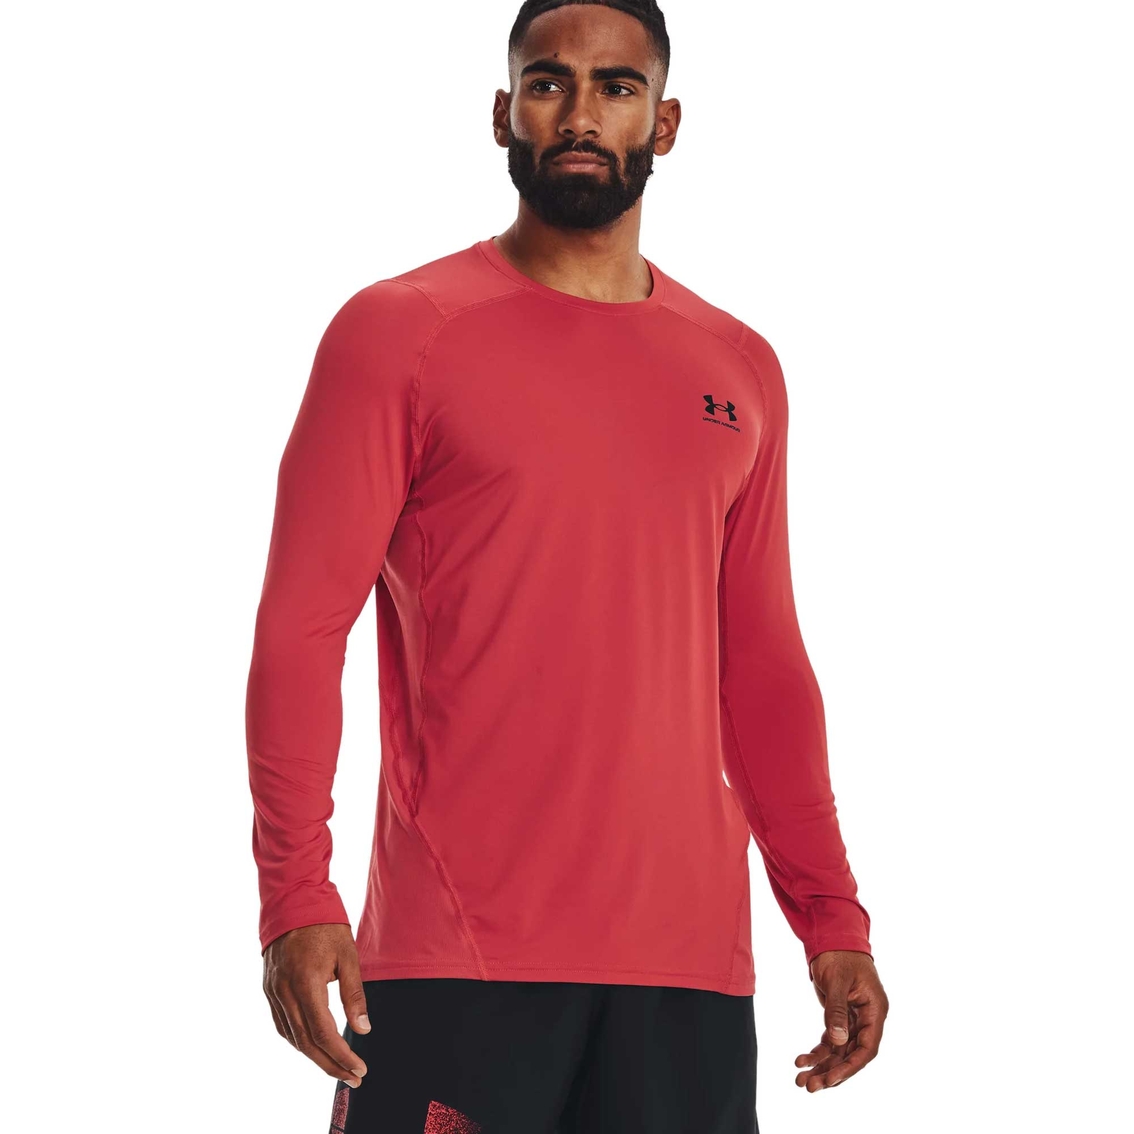 Under Armour Men's Heat Gear Armour Fitted Top | Shirts | Clothing ...